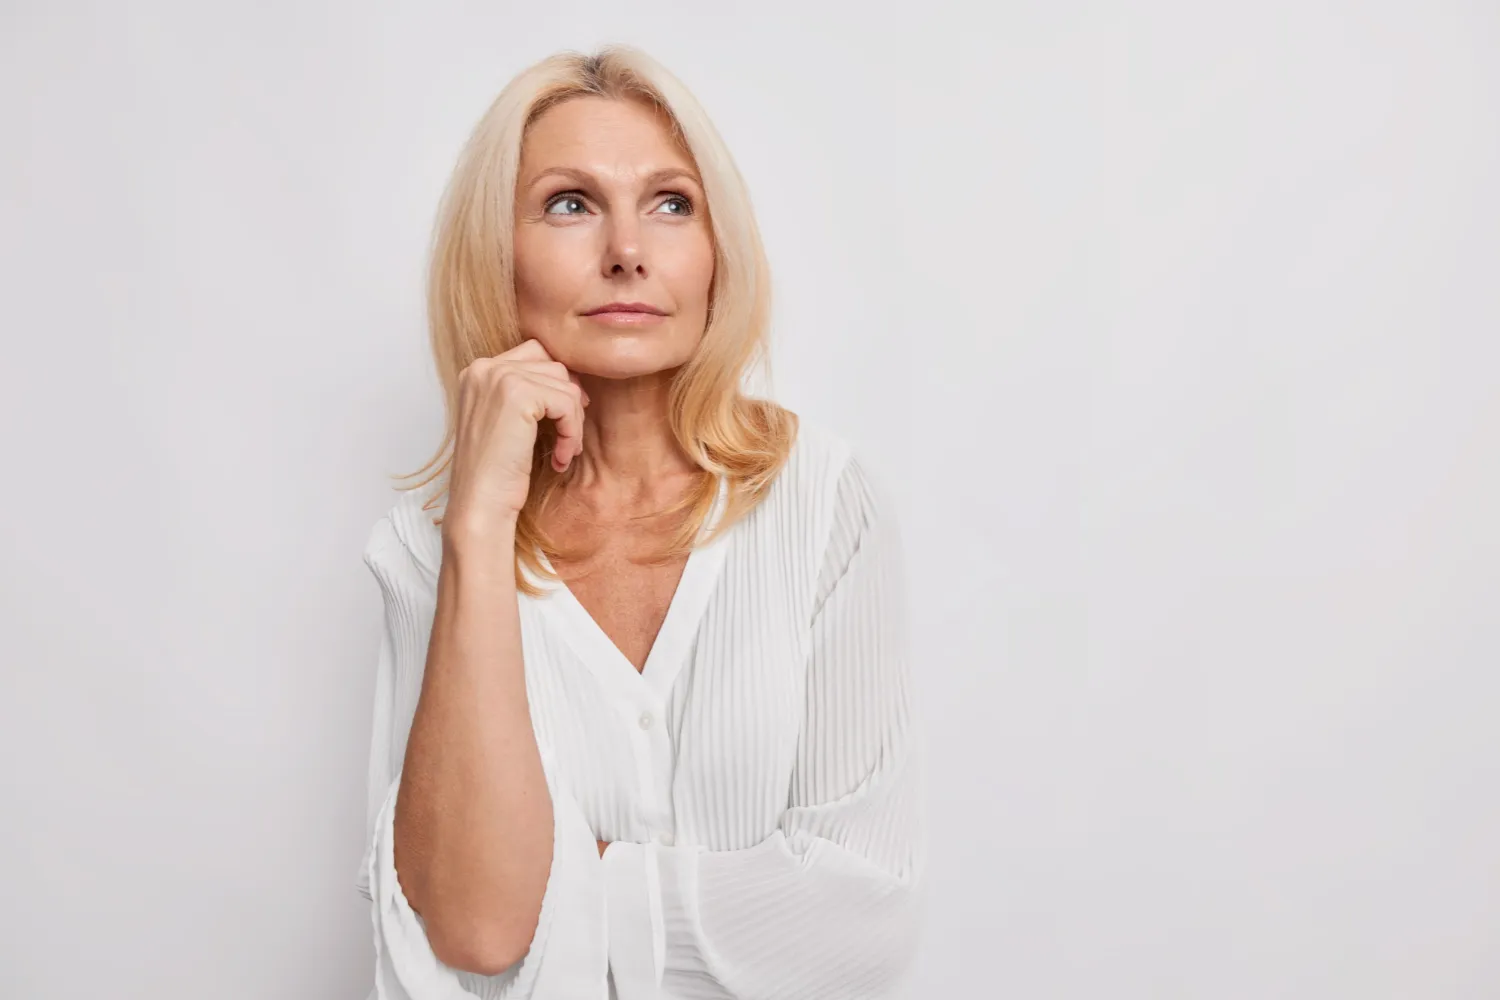 thoughtful-blonde-middle-aged-woman-ponders-something-keeps-hand-near-face-has-healthy-skin-minimal-makeup-makes-choice-wears-white-blouse-poses-indoor-blank-copy-space-your-promotion